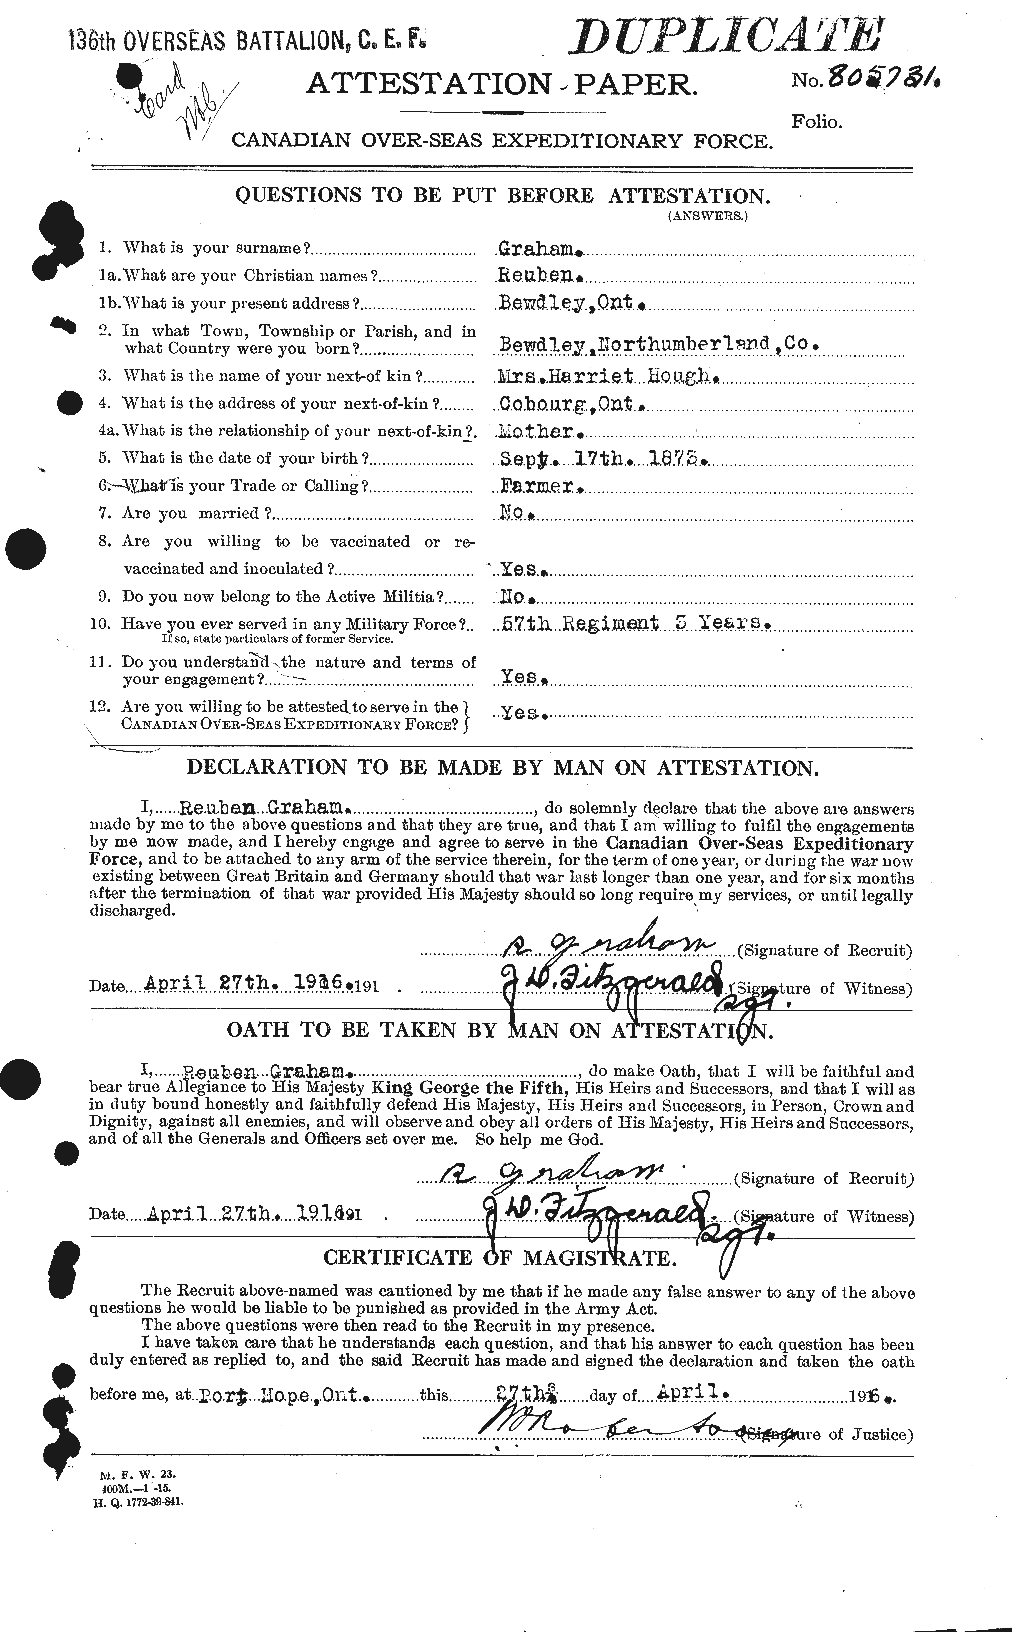 Personnel Records of the First World War - CEF 691149a